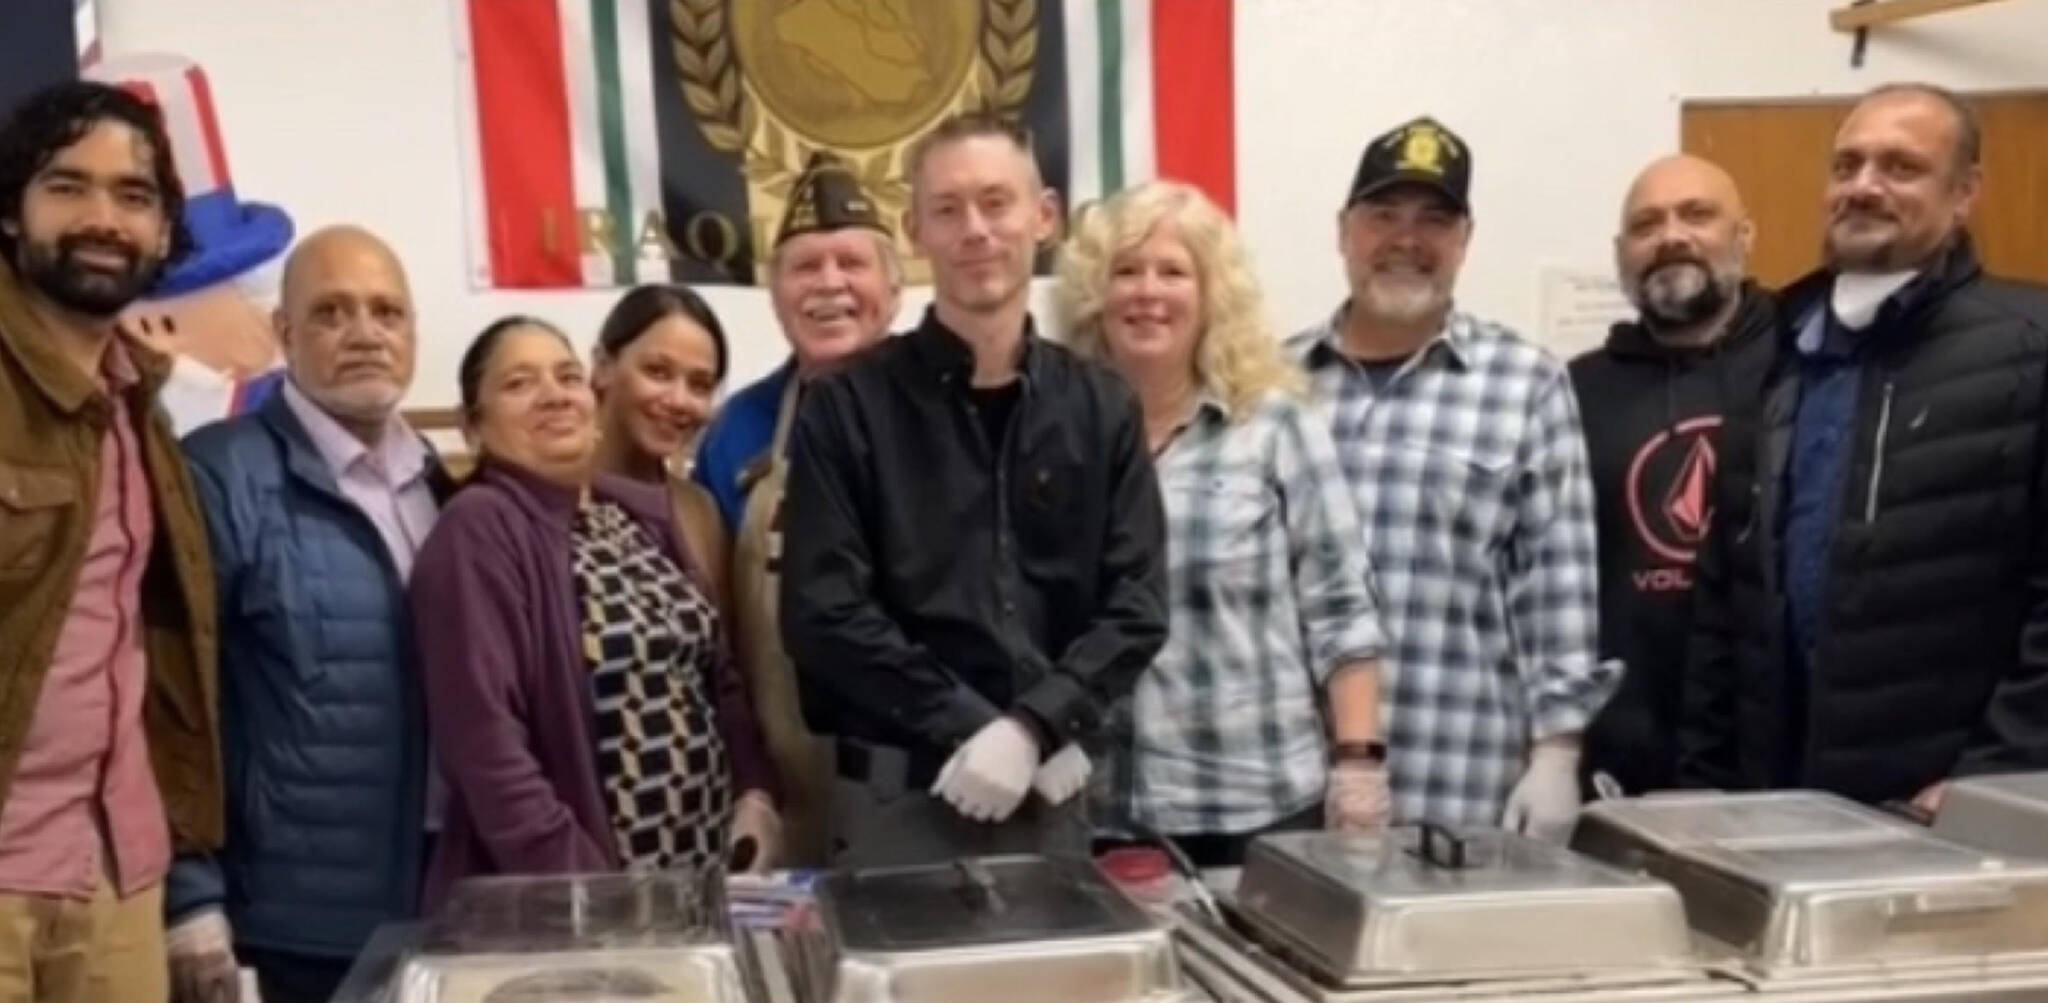 Submitted photo
The Khela family and community volunteers help deliver 300 Thanksgiving meals at the Sequim VFW Post. Pictured, from left, are Kurin Pandher, Singh Khela, Ramesh Khela, Sukhy Dhillon, Kevin O’Neill, Ken Bearly, Judy Nordstrom, Kris Nordstrom, Sonny Khela and Hap Khela.